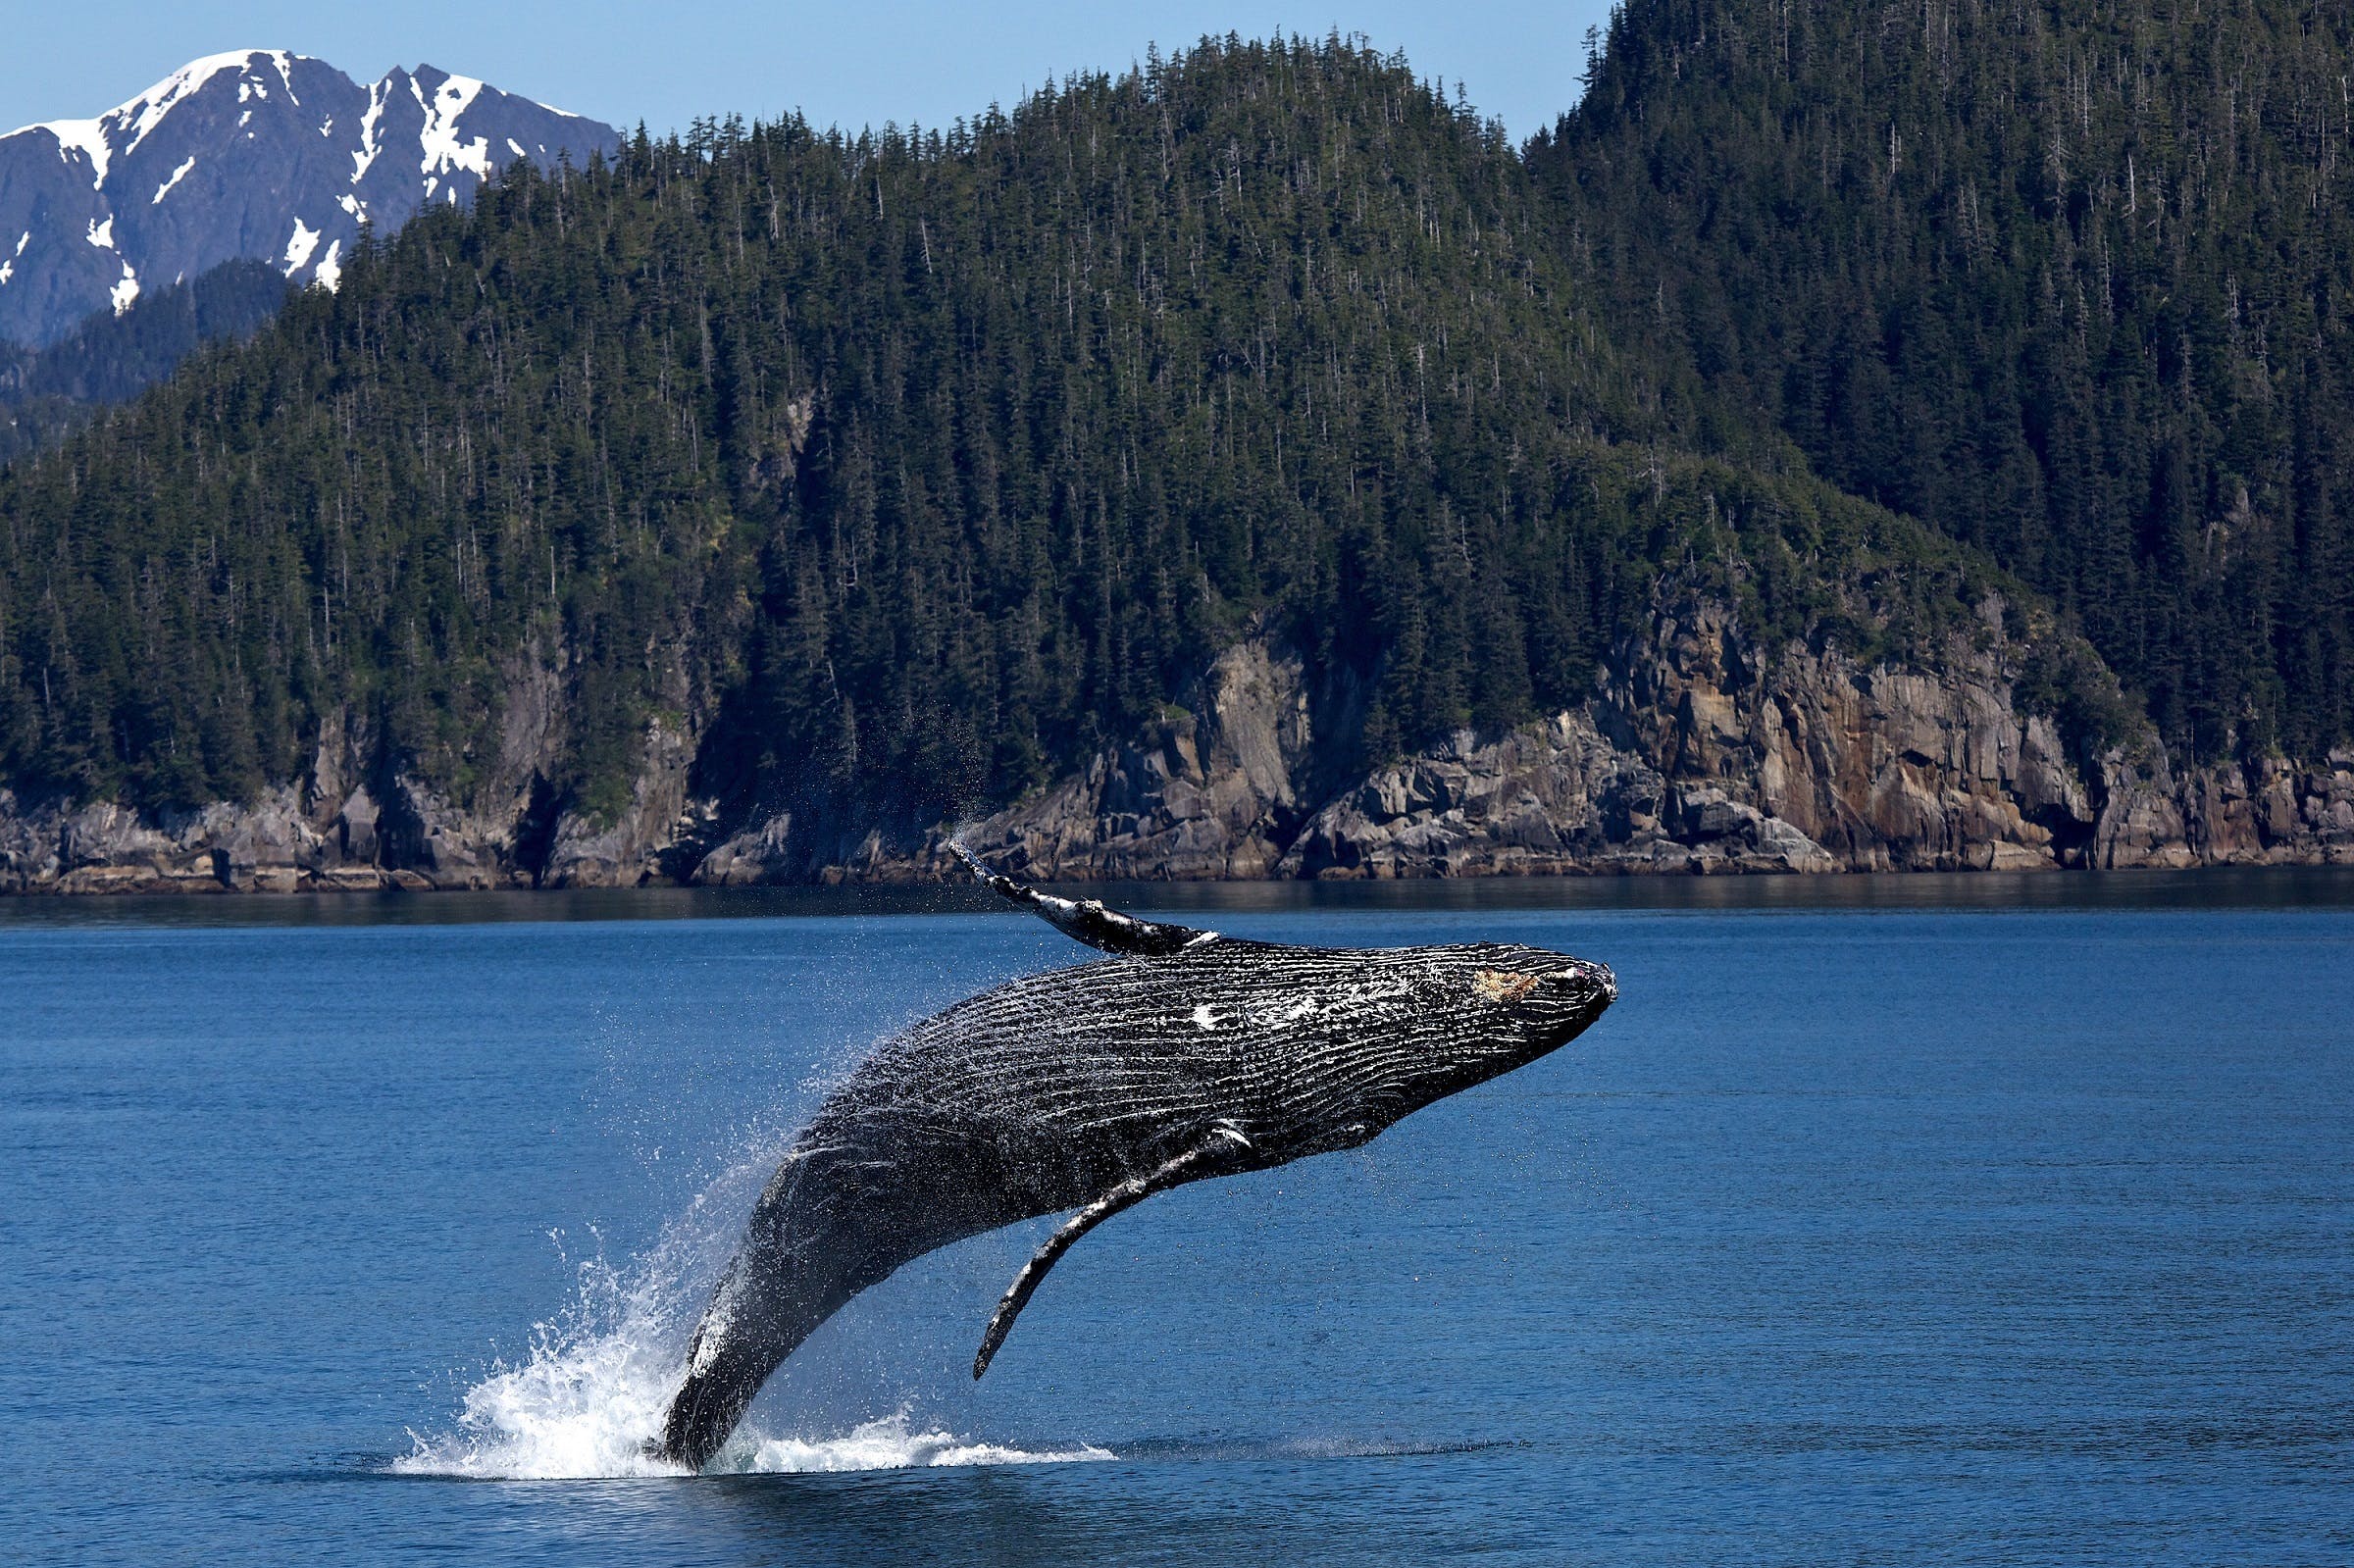 Free Humpback Whale Jumping on Ocean  Stock Photo